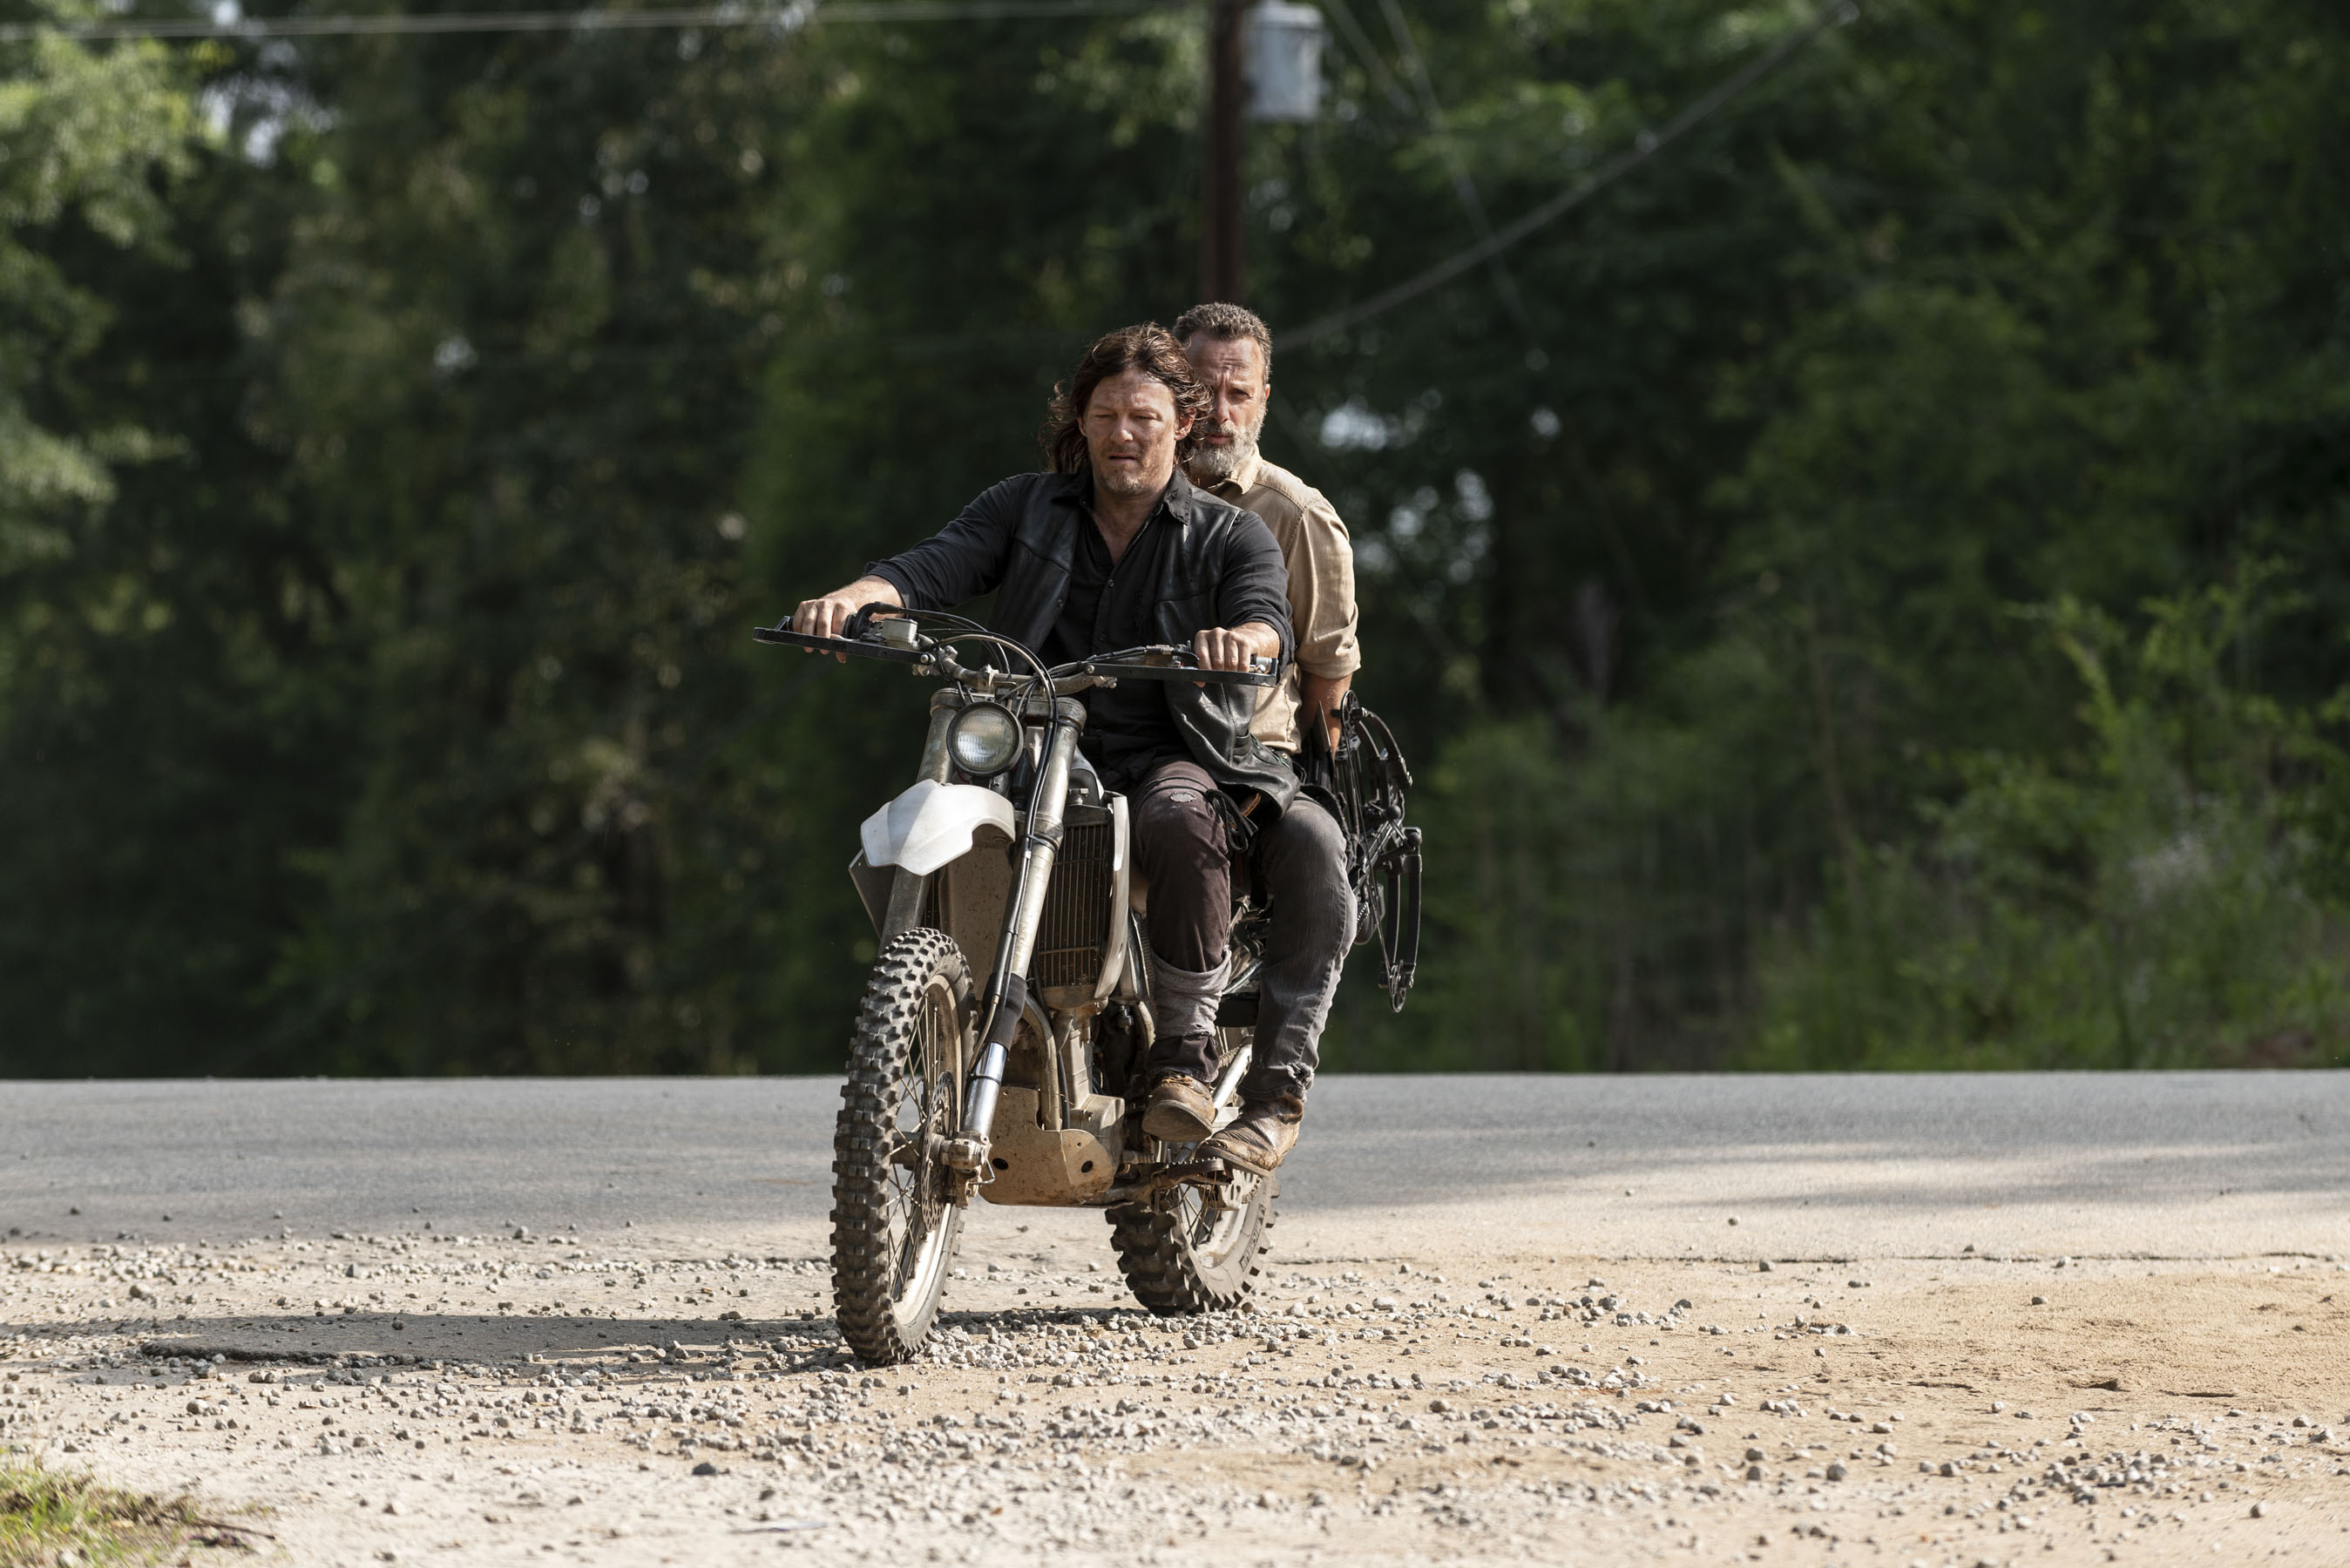 Andrew Lincoln as Rick Grimes, Norman Reedus as Daryl Dixon; group - The Walking Dead _ Season 9, Episode 4 - Photo Credit: Gene Page/AMC